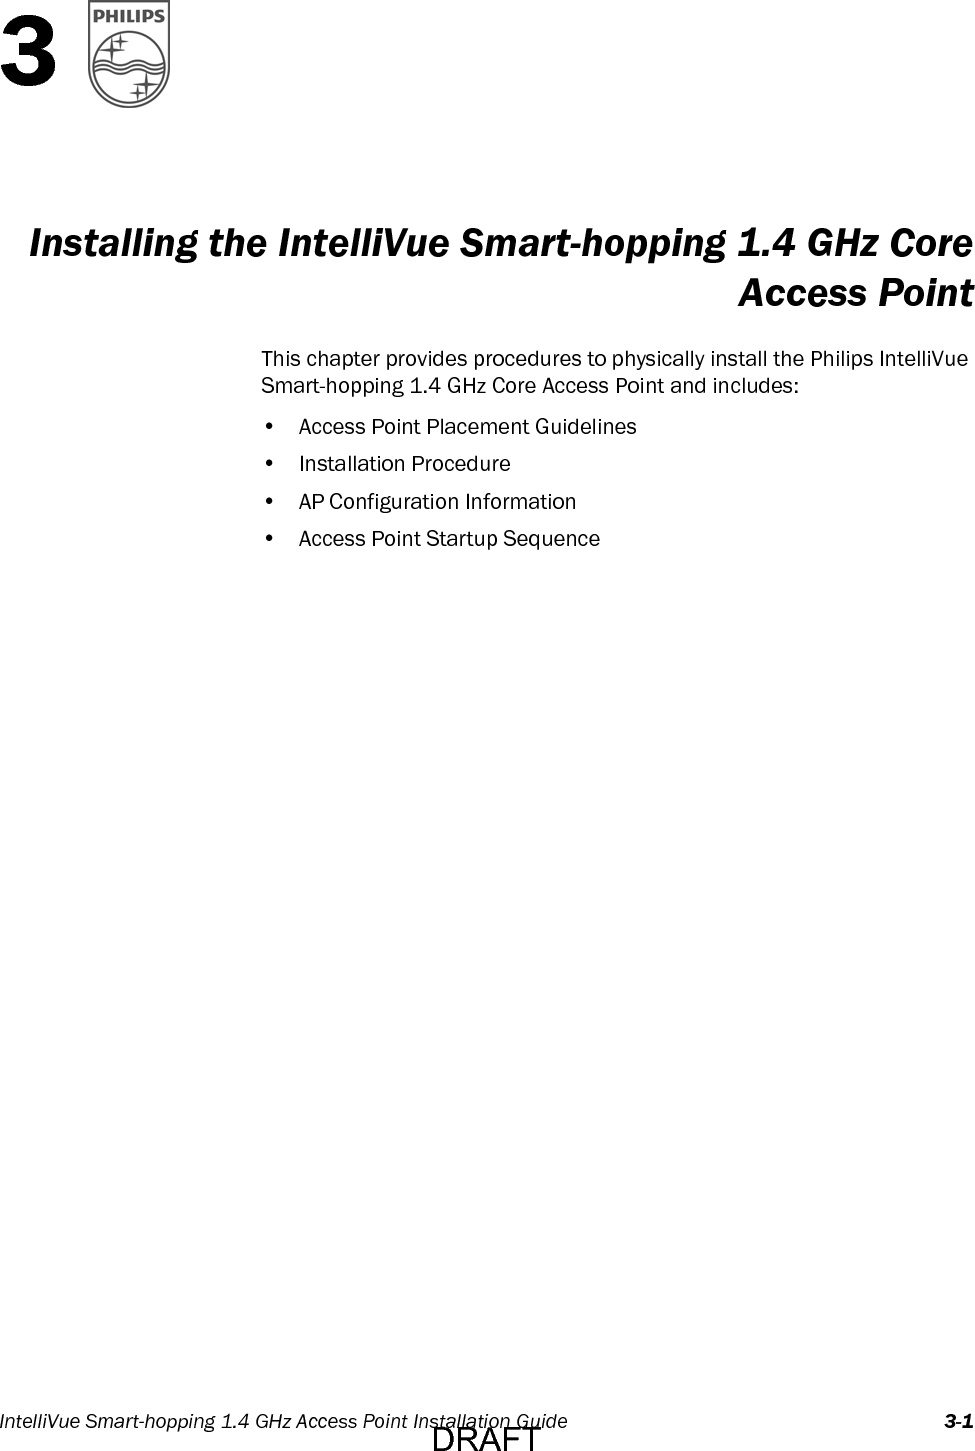 IntelliVue Smart-hopping 1.4 GHz Access Point Installation Guide 3-13Installing the IntelliVue Smart-hopping 1.4 GHz CoreAccess PointThis chapter provides procedures to physically install the Philips IntelliVue Smart-hopping 1.4 GHz Core Access Point and includes:• Access Point Placement Guidelines• Installation Procedure• AP Configuration Information• Access Point Startup SequenceDRAFT